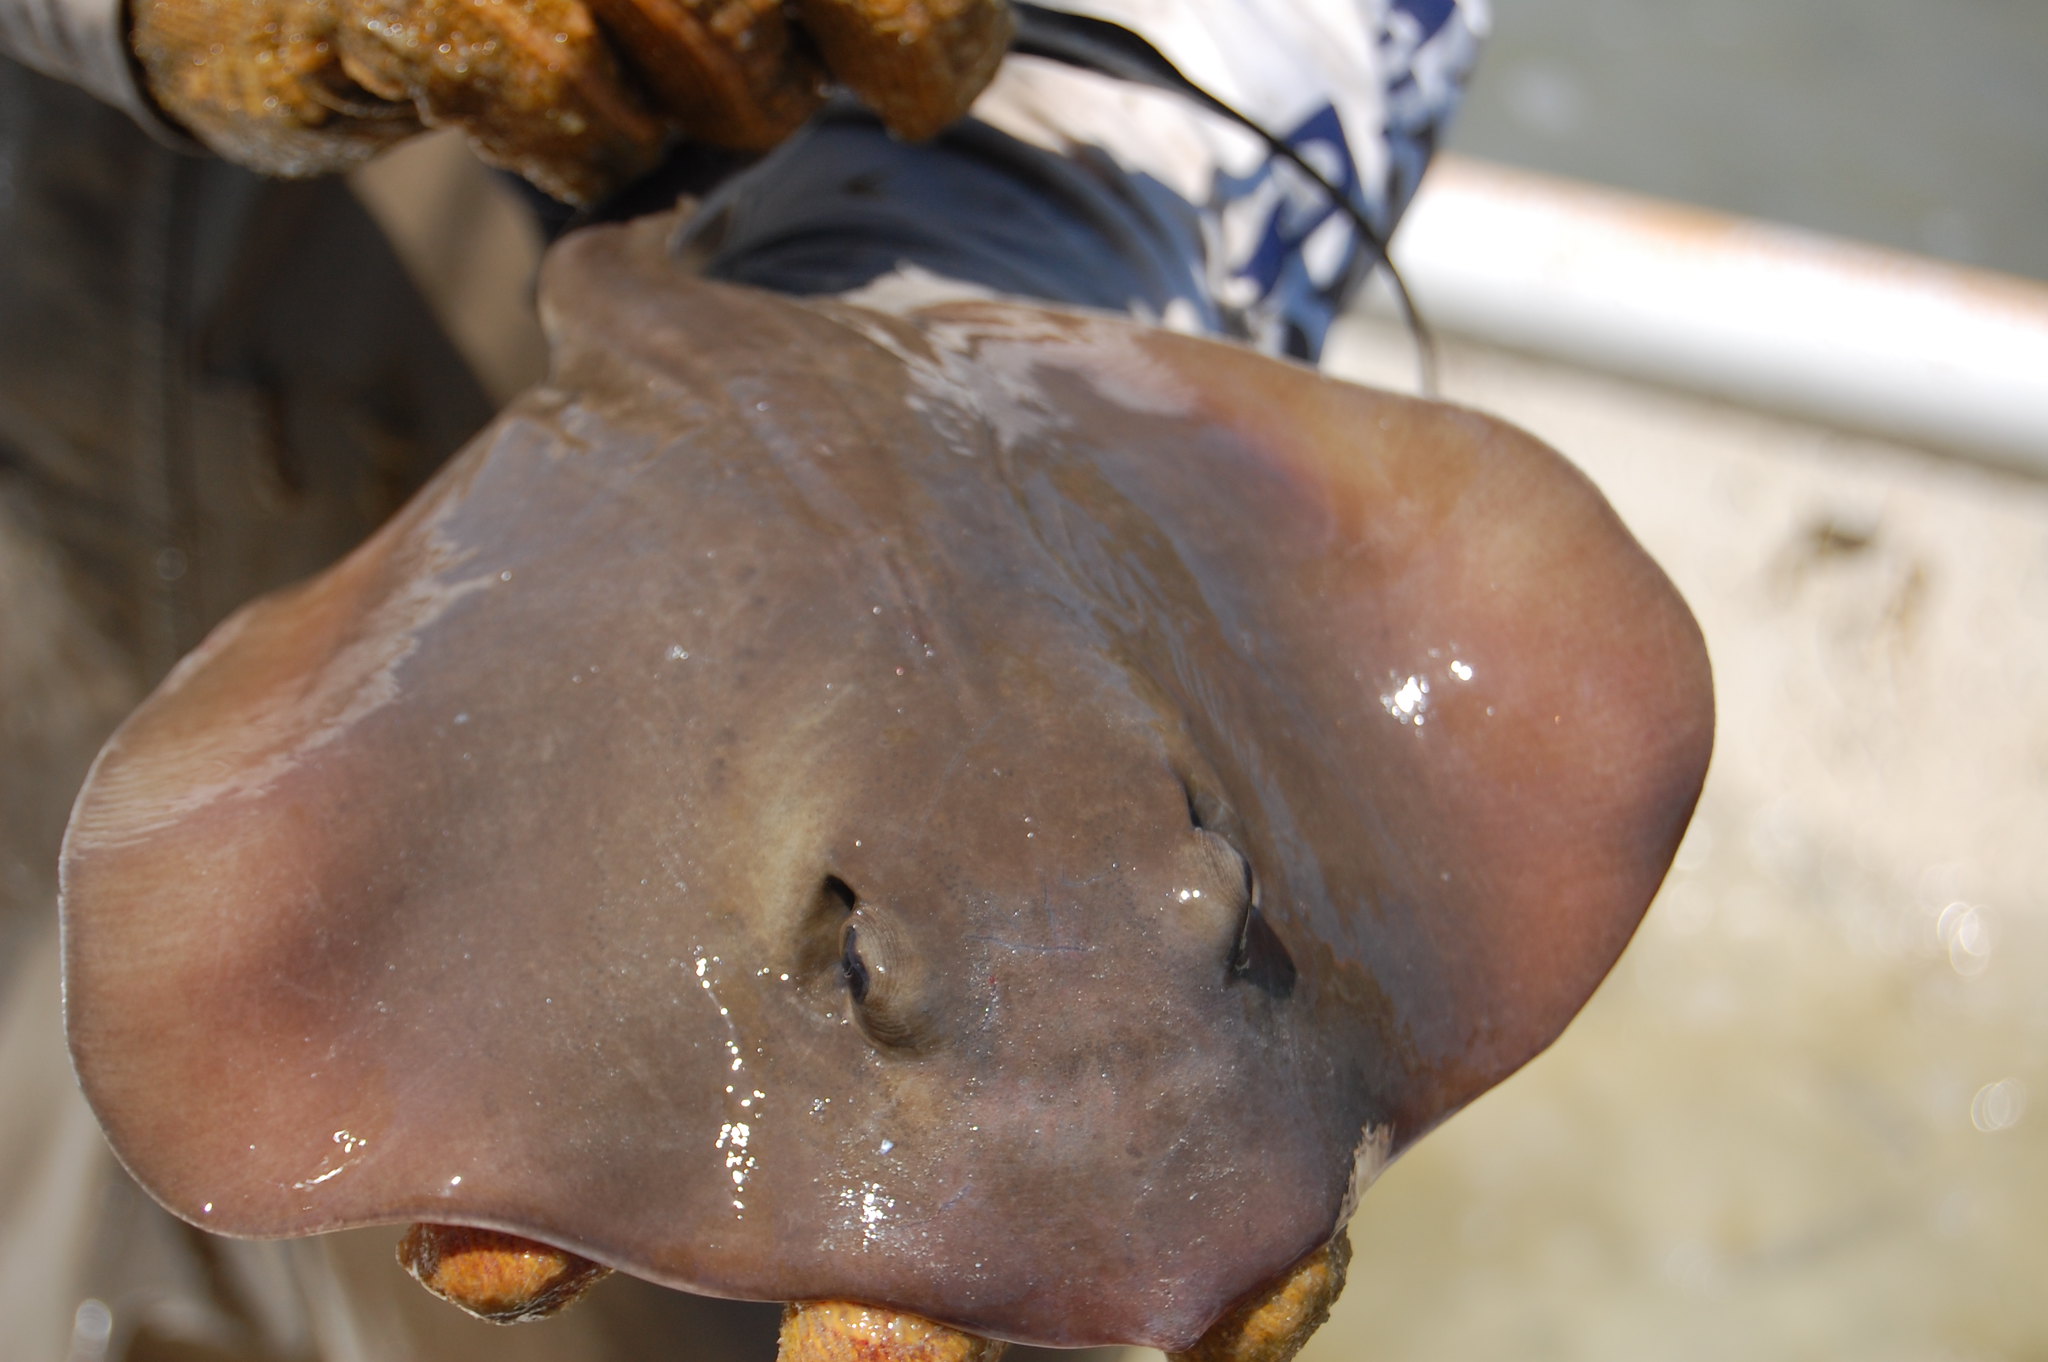 An Atlantic stingray can stab anglers if not handled properly.